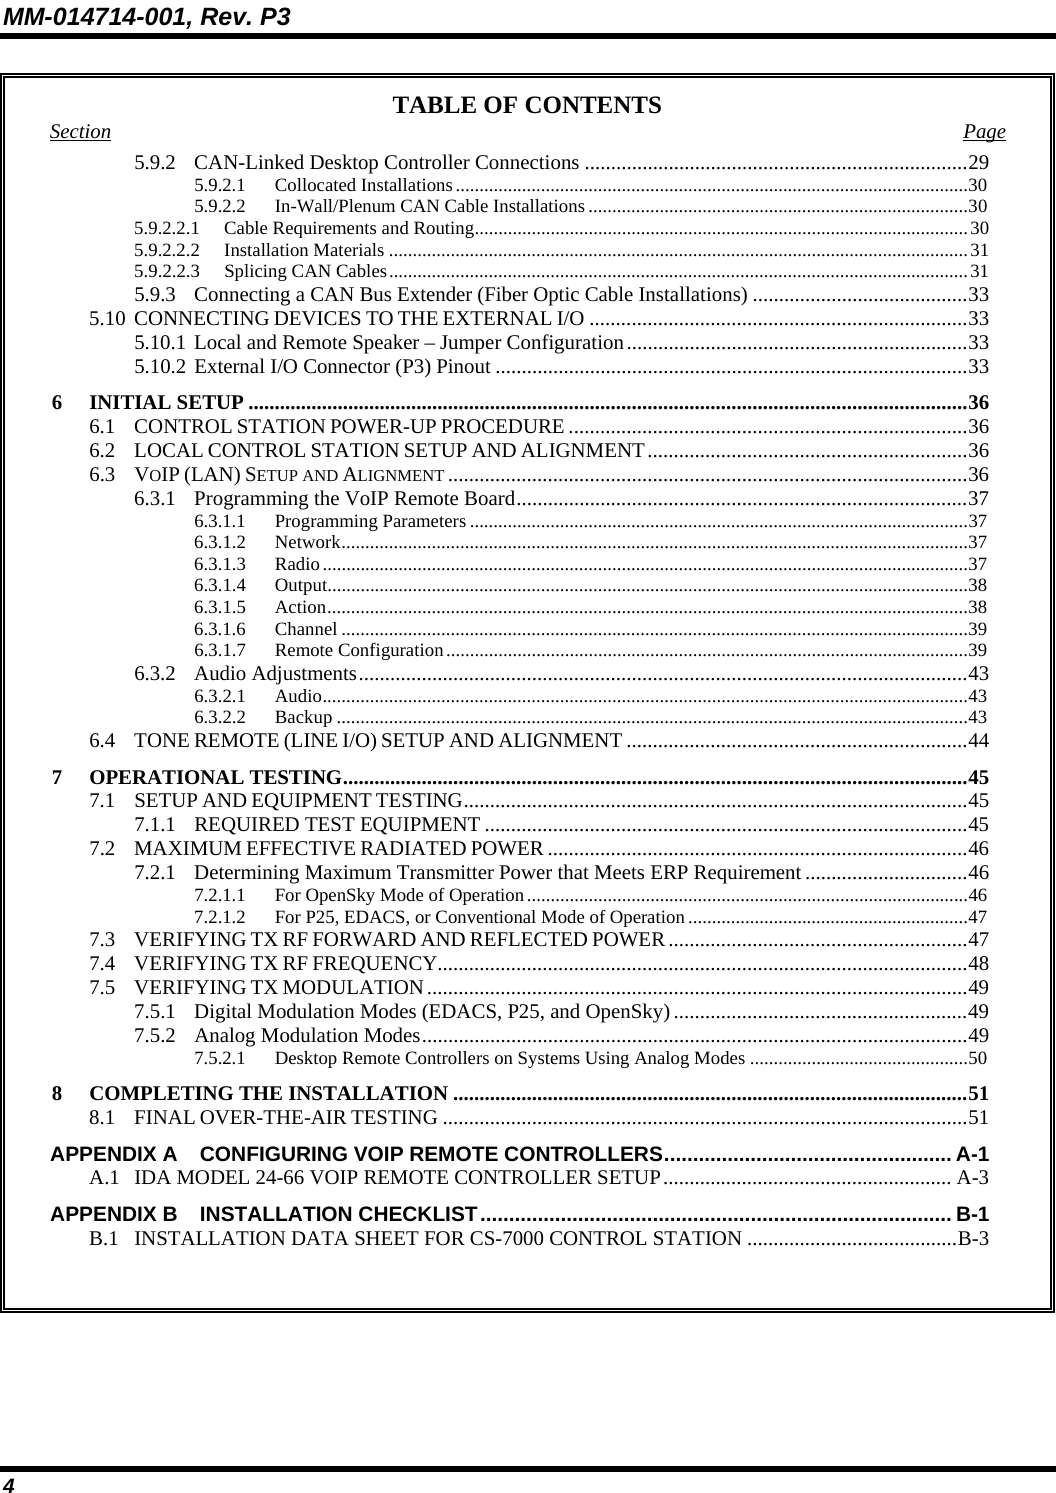 MM-014714-001, Rev. P3 4 TABLE OF CONTENTS Section Page 5.9.2 CAN-Linked Desktop Controller Connections .........................................................................29 5.9.2.1 Collocated Installations............................................................................................................30 5.9.2.2 In-Wall/Plenum CAN Cable Installations ................................................................................30 5.9.2.2.1 Cable Requirements and Routing........................................................................................................30 5.9.2.2.2 Installation Materials ..........................................................................................................................31 5.9.2.2.3 Splicing CAN Cables..........................................................................................................................31 5.9.3  Connecting a CAN Bus Extender (Fiber Optic Cable Installations) .........................................33 5.10 CONNECTING DEVICES TO THE EXTERNAL I/O ........................................................................33 5.10.1 Local and Remote Speaker – Jumper Configuration.................................................................33 5.10.2 External I/O Connector (P3) Pinout ..........................................................................................33 6 INITIAL SETUP .........................................................................................................................................36 6.1 CONTROL STATION POWER-UP PROCEDURE ............................................................................36 6.2 LOCAL CONTROL STATION SETUP AND ALIGNMENT.............................................................36 6.3 VOIP (LAN) SETUP AND ALIGNMENT ...................................................................................................36 6.3.1 Programming the VoIP Remote Board......................................................................................37 6.3.1.1 Programming Parameters .........................................................................................................37 6.3.1.2 Network....................................................................................................................................37 6.3.1.3 Radio........................................................................................................................................37 6.3.1.4 Output.......................................................................................................................................38 6.3.1.5 Action.......................................................................................................................................38 6.3.1.6 Channel ....................................................................................................................................39 6.3.1.7 Remote Configuration..............................................................................................................39 6.3.2 Audio Adjustments....................................................................................................................43 6.3.2.1 Audio........................................................................................................................................43 6.3.2.2  Backup .....................................................................................................................................43 6.4 TONE REMOTE (LINE I/O) SETUP AND ALIGNMENT .................................................................44 7 OPERATIONAL TESTING.......................................................................................................................45 7.1 SETUP AND EQUIPMENT TESTING................................................................................................45 7.1.1  REQUIRED TEST EQUIPMENT ............................................................................................45 7.2 MAXIMUM EFFECTIVE RADIATED POWER ................................................................................46 7.2.1 Determining Maximum Transmitter Power that Meets ERP Requirement ...............................46 7.2.1.1  For OpenSky Mode of Operation.............................................................................................46 7.2.1.2  For P25, EDACS, or Conventional Mode of Operation...........................................................47 7.3 VERIFYING TX RF FORWARD AND REFLECTED POWER.........................................................47 7.4 VERIFYING TX RF FREQUENCY.....................................................................................................48 7.5 VERIFYING TX MODULATION.......................................................................................................49 7.5.1  Digital Modulation Modes (EDACS, P25, and OpenSky)........................................................49 7.5.2  Analog Modulation Modes........................................................................................................49 7.5.2.1  Desktop Remote Controllers on Systems Using Analog Modes ..............................................50 8 COMPLETING THE INSTALLATION ..................................................................................................51 8.1 FINAL OVER-THE-AIR TESTING ....................................................................................................51 APPENDIX A  CONFIGURING VOIP REMOTE CONTROLLERS.................................................. A-1 A.1  IDA MODEL 24-66 VOIP REMOTE CONTROLLER SETUP....................................................... A-3 APPENDIX B  INSTALLATION CHECKLIST.................................................................................. B-1 B.1  INSTALLATION DATA SHEET FOR CS-7000 CONTROL STATION ........................................B-3   